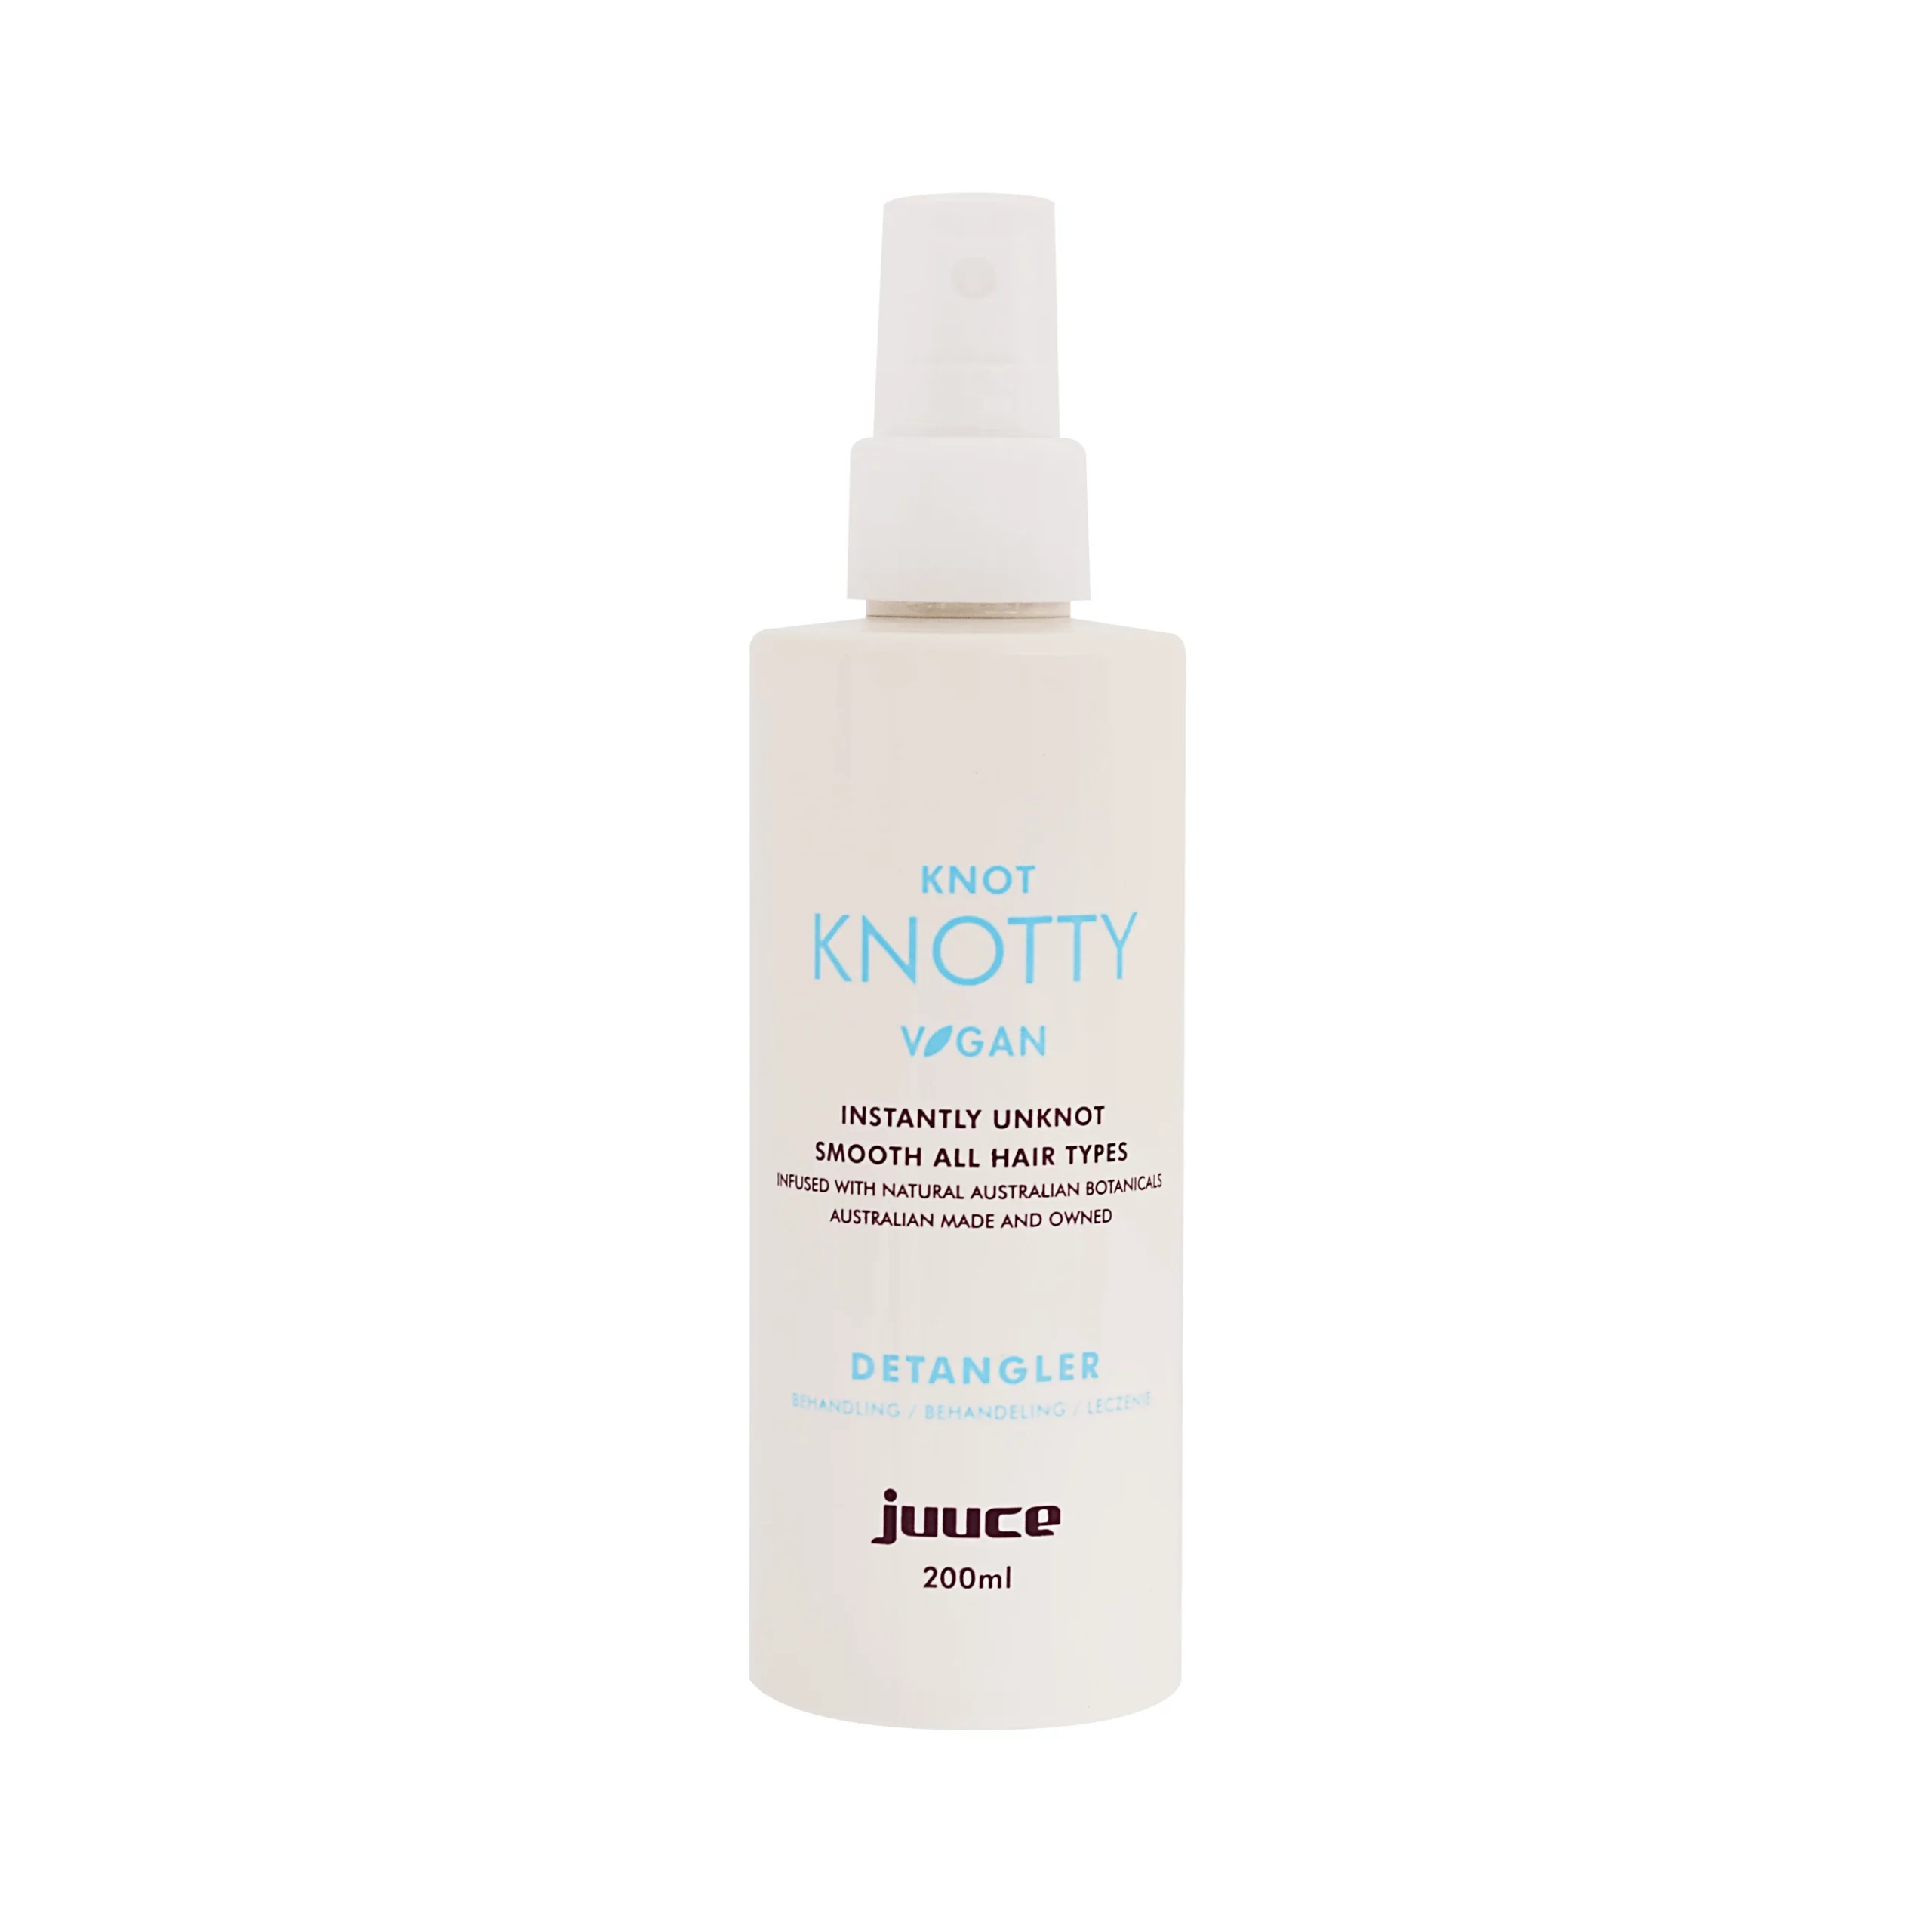 juuce-haircare-product-new-knot-knotty-instantly-unknot-200ml-hair-pinns